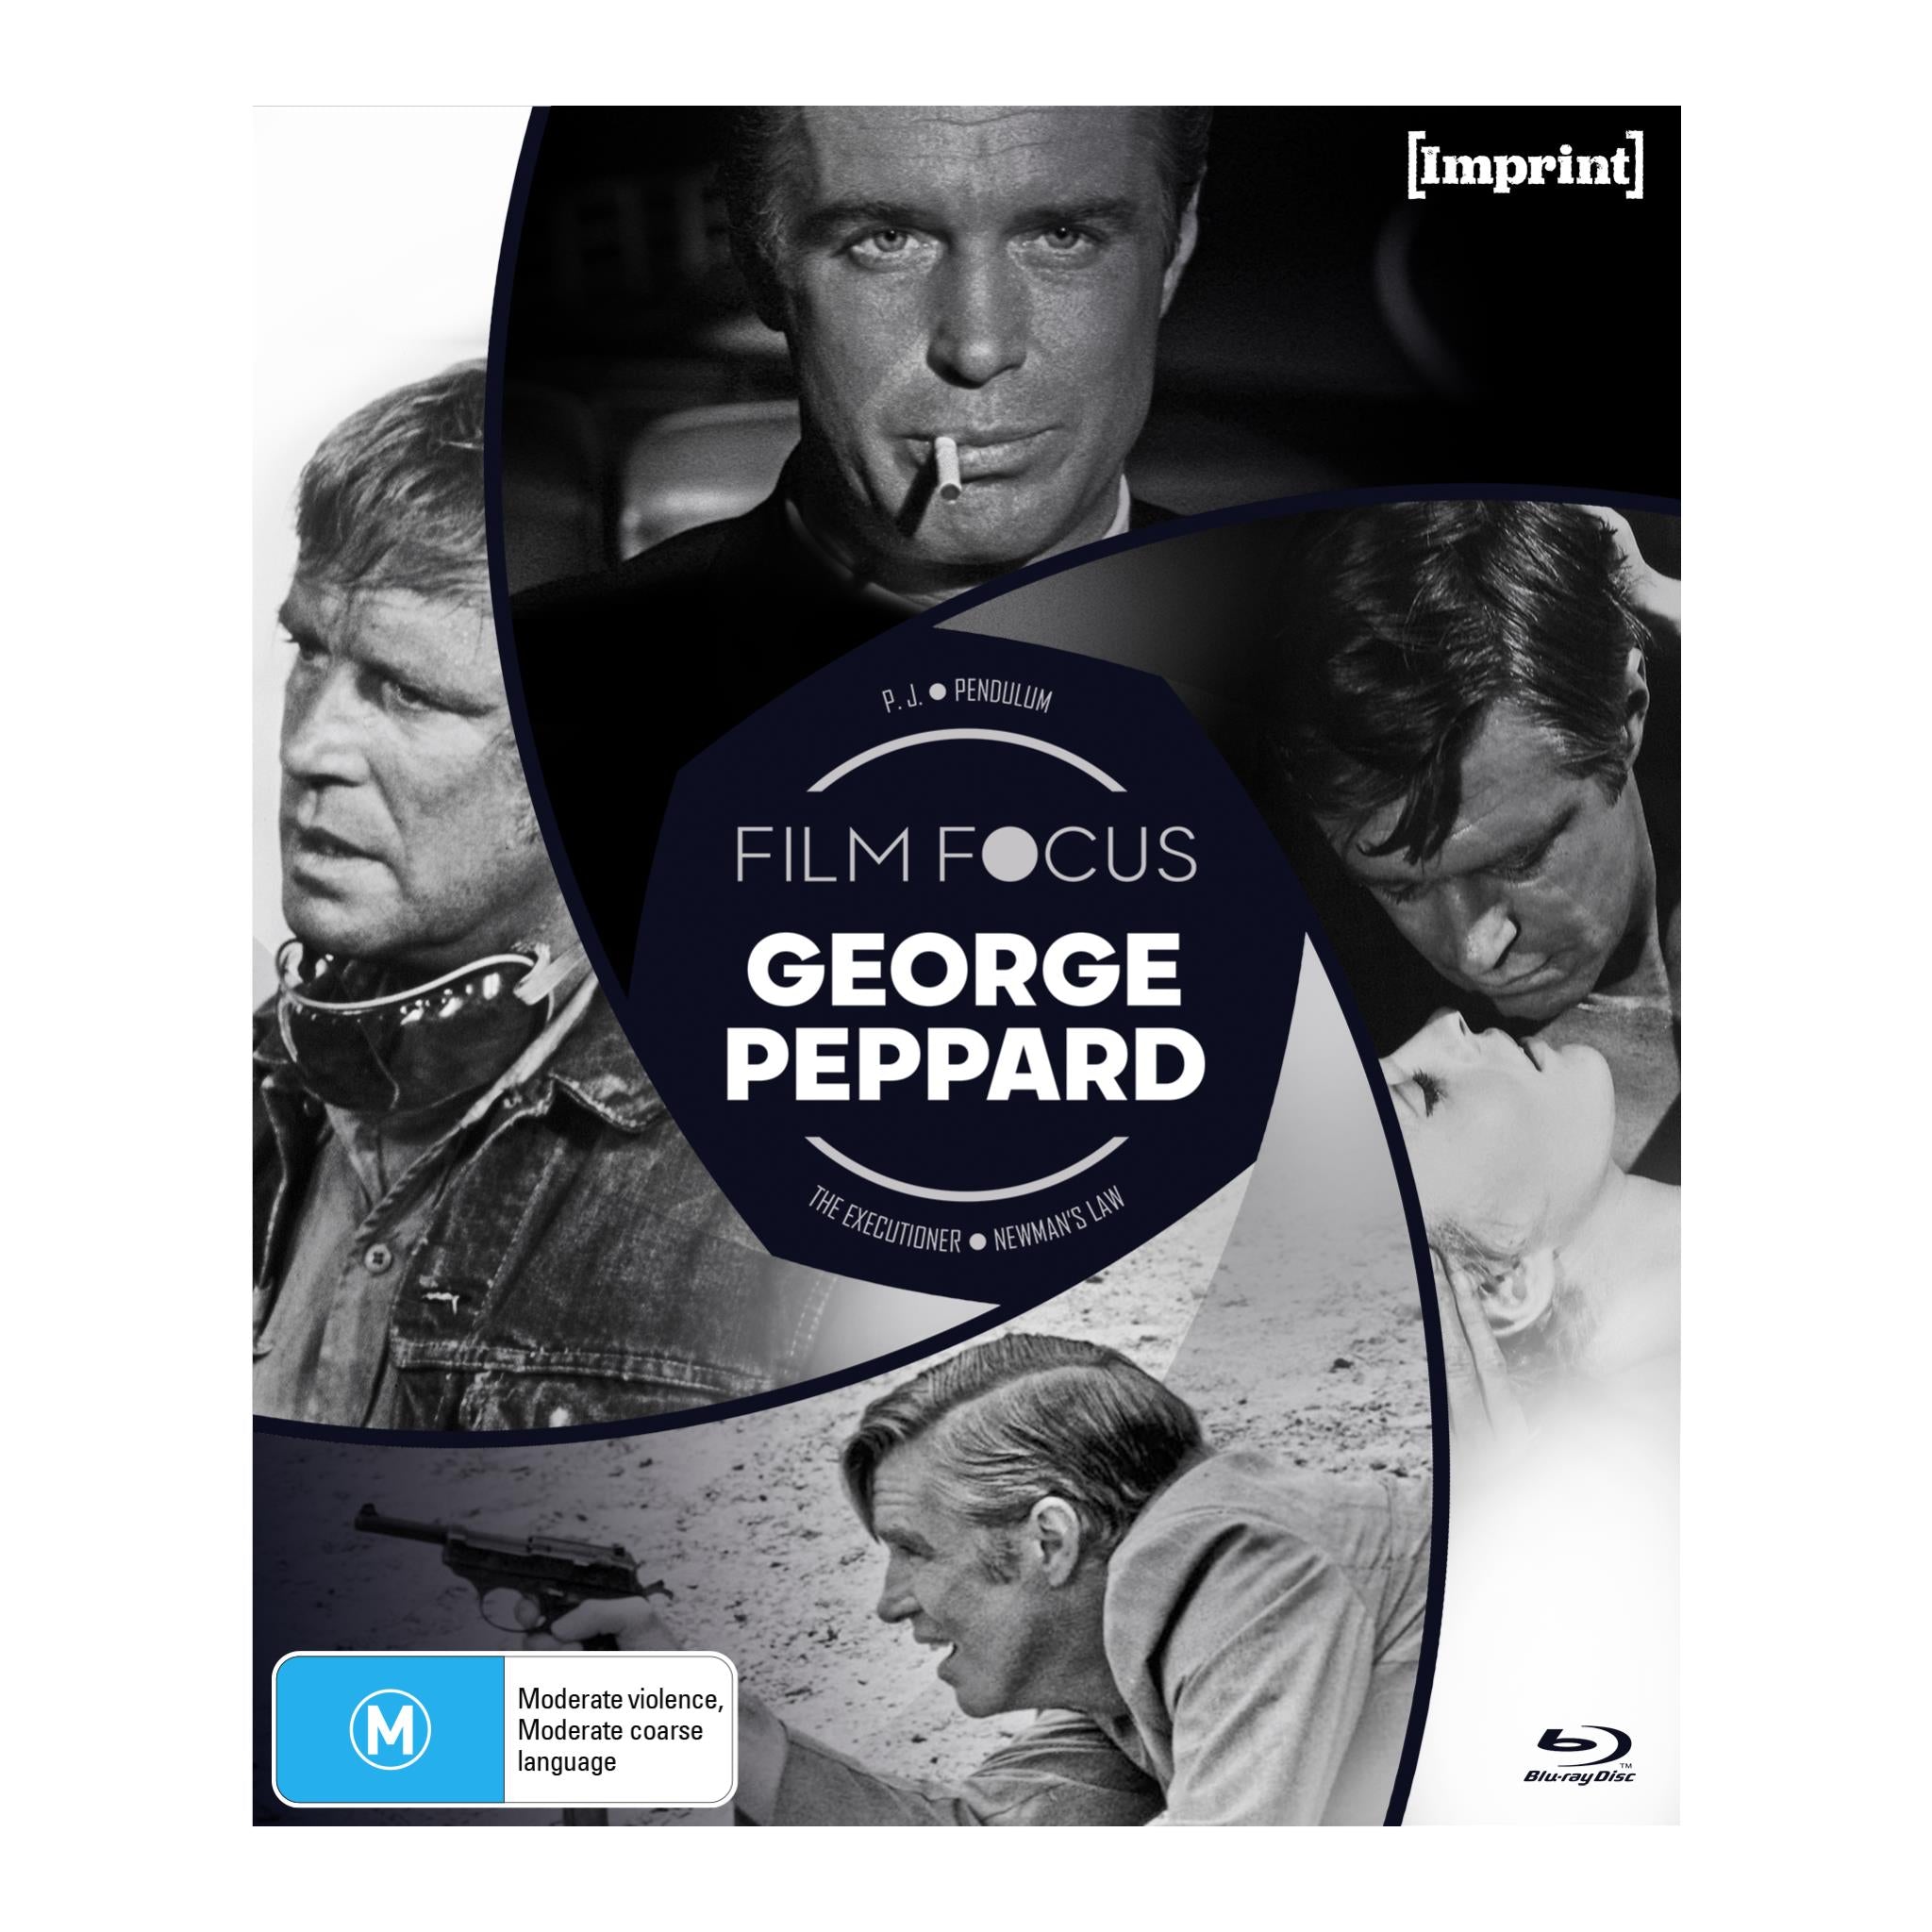 film focus: george peppard (imprint collection special edition)